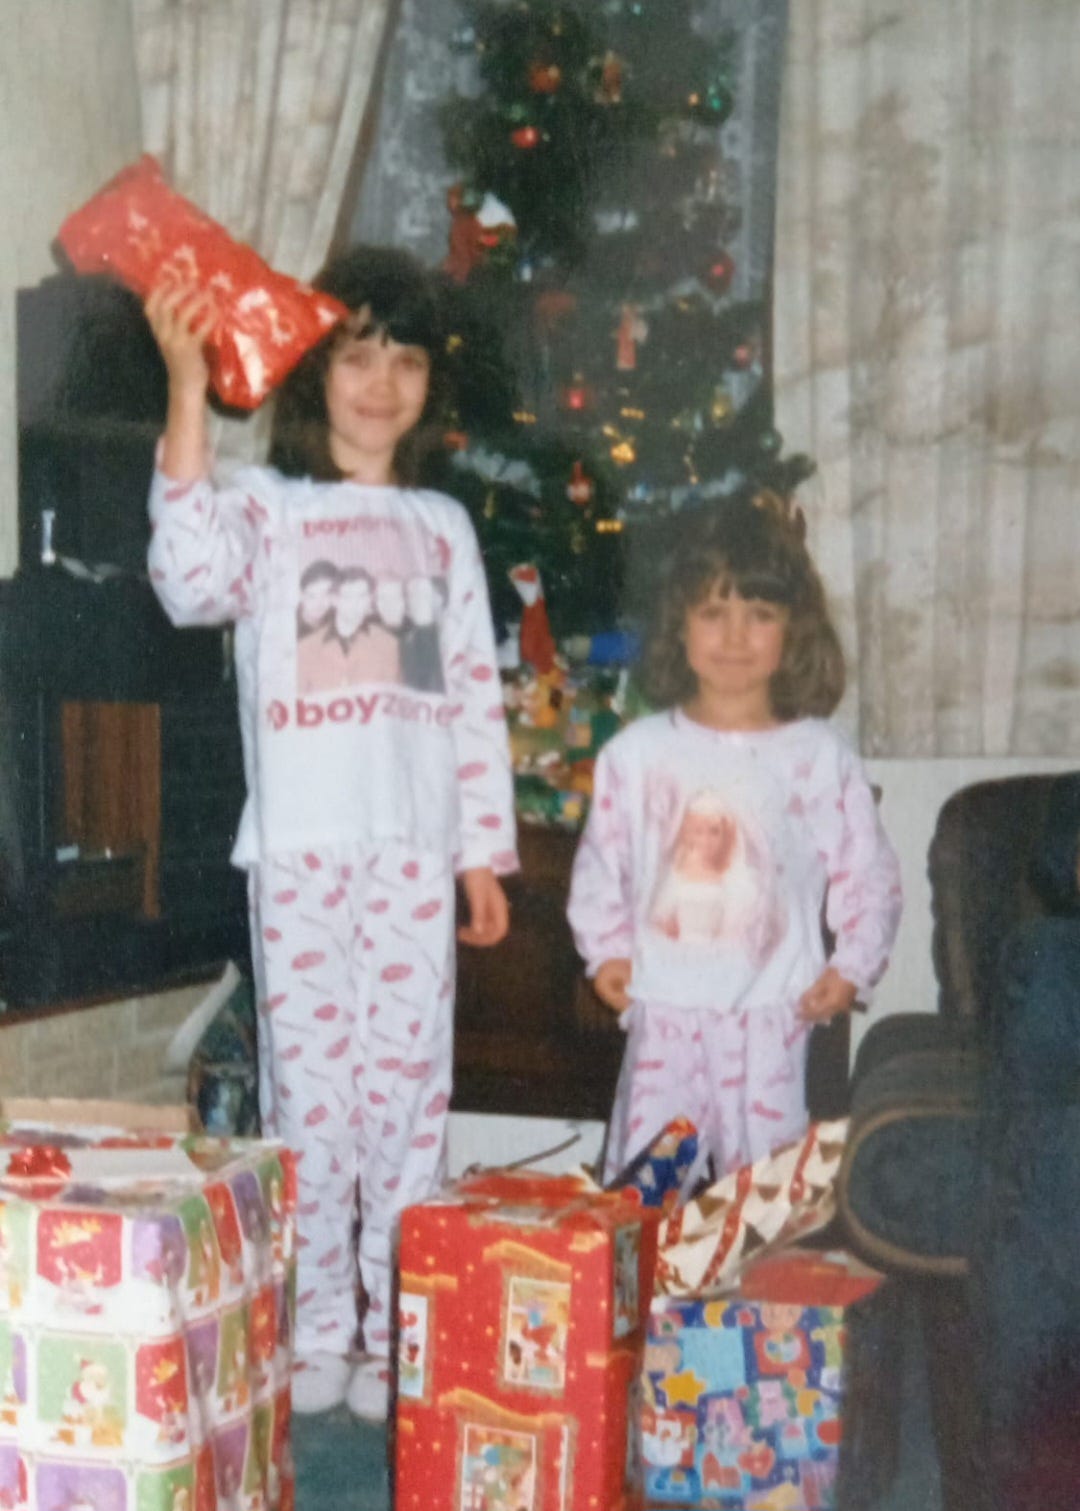 My sister and I as children standing with our Christmas presents in front of the tree in the late 90s.  We both have brown hair and fringes. I'm wearing Boyzone PJs, Leanne is wearing Barbie PJs